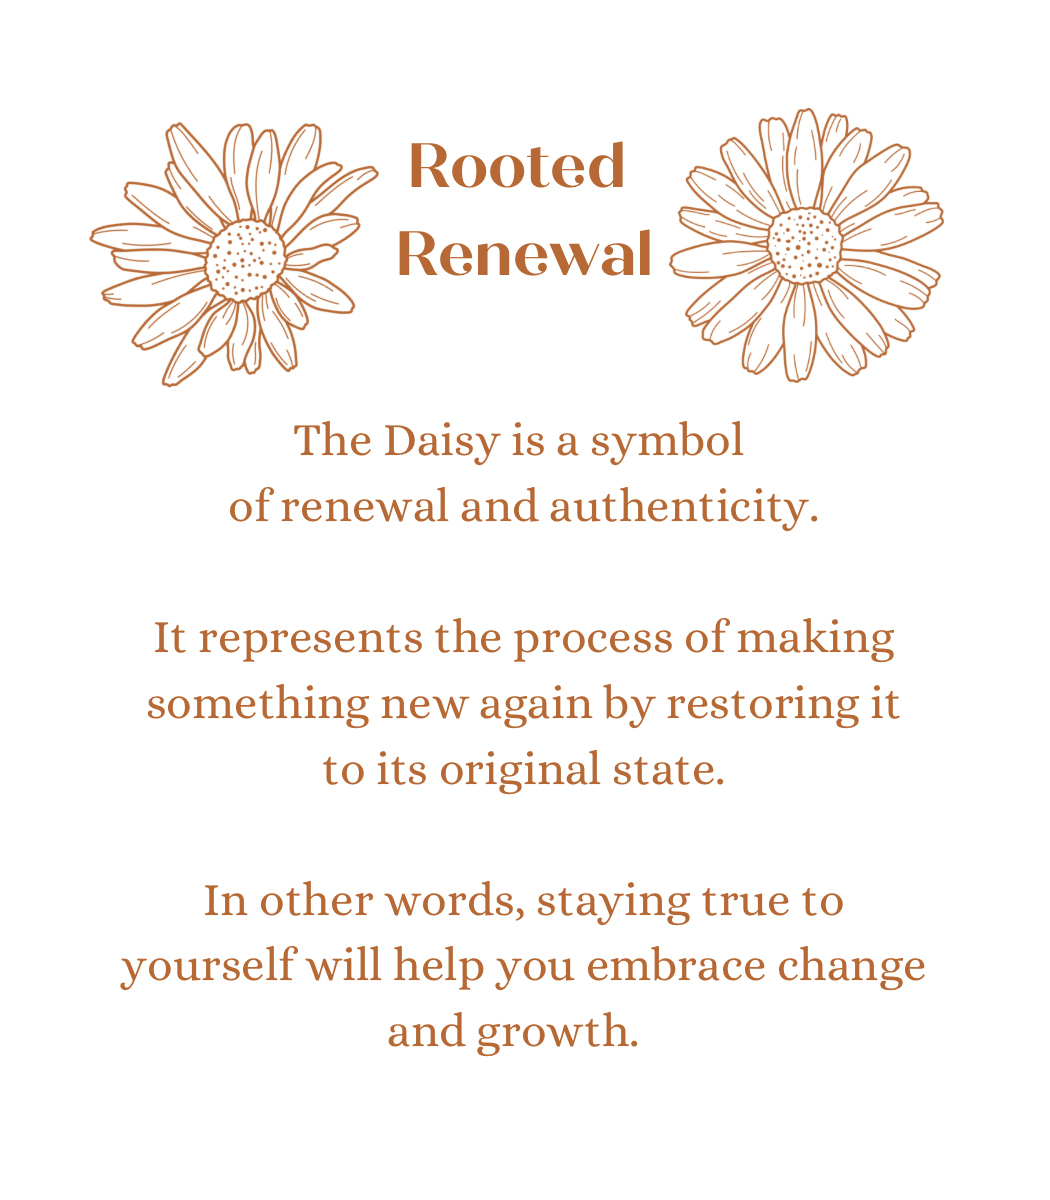 Rooted Renewal in Athena